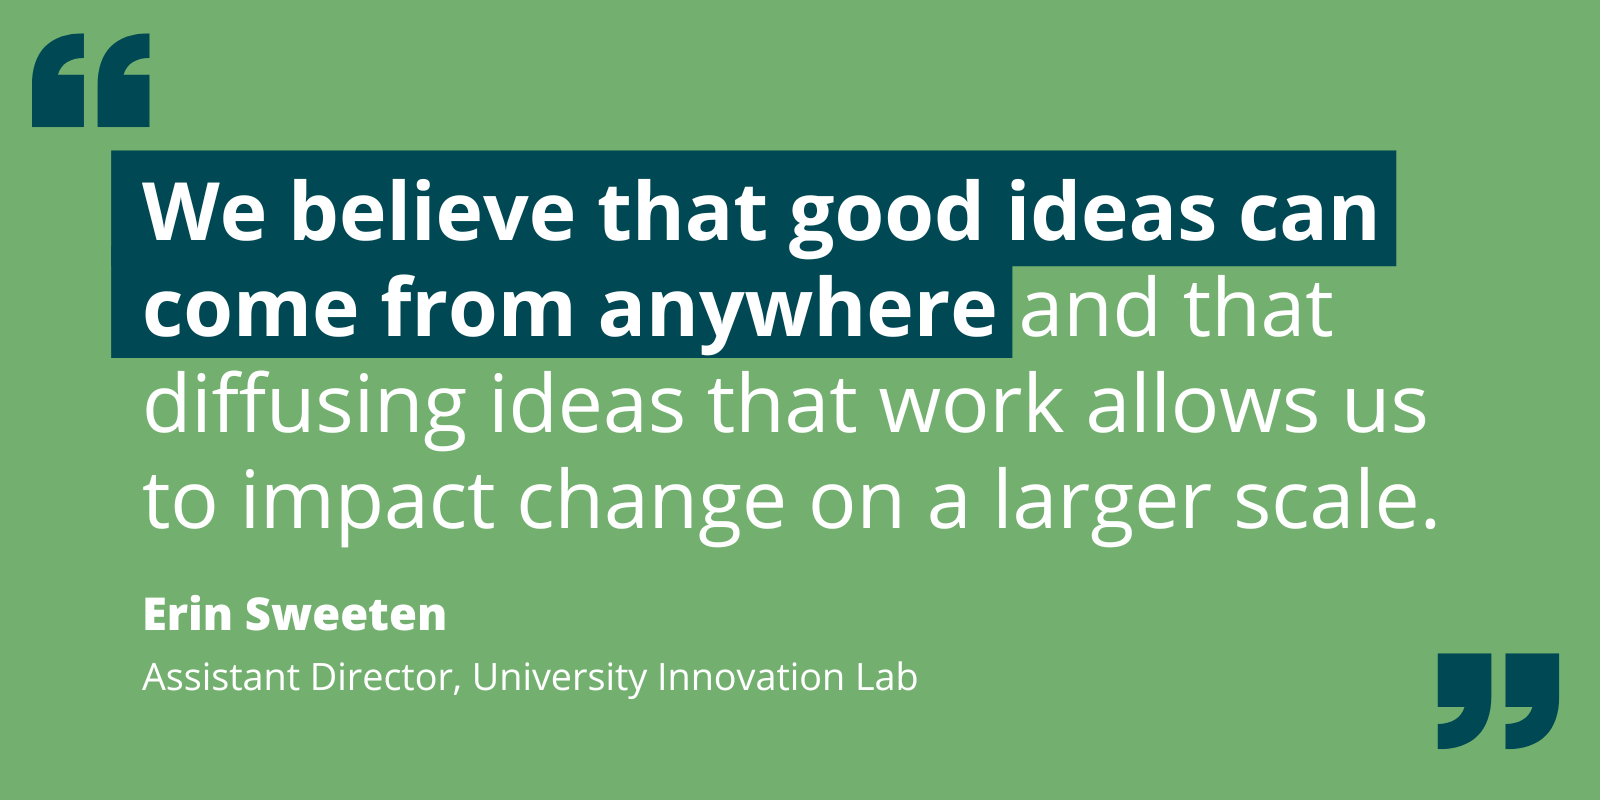 Quote by Erin Sweeten re: how the UI Lab accepts and diffuses ideas to impact large-scale change.